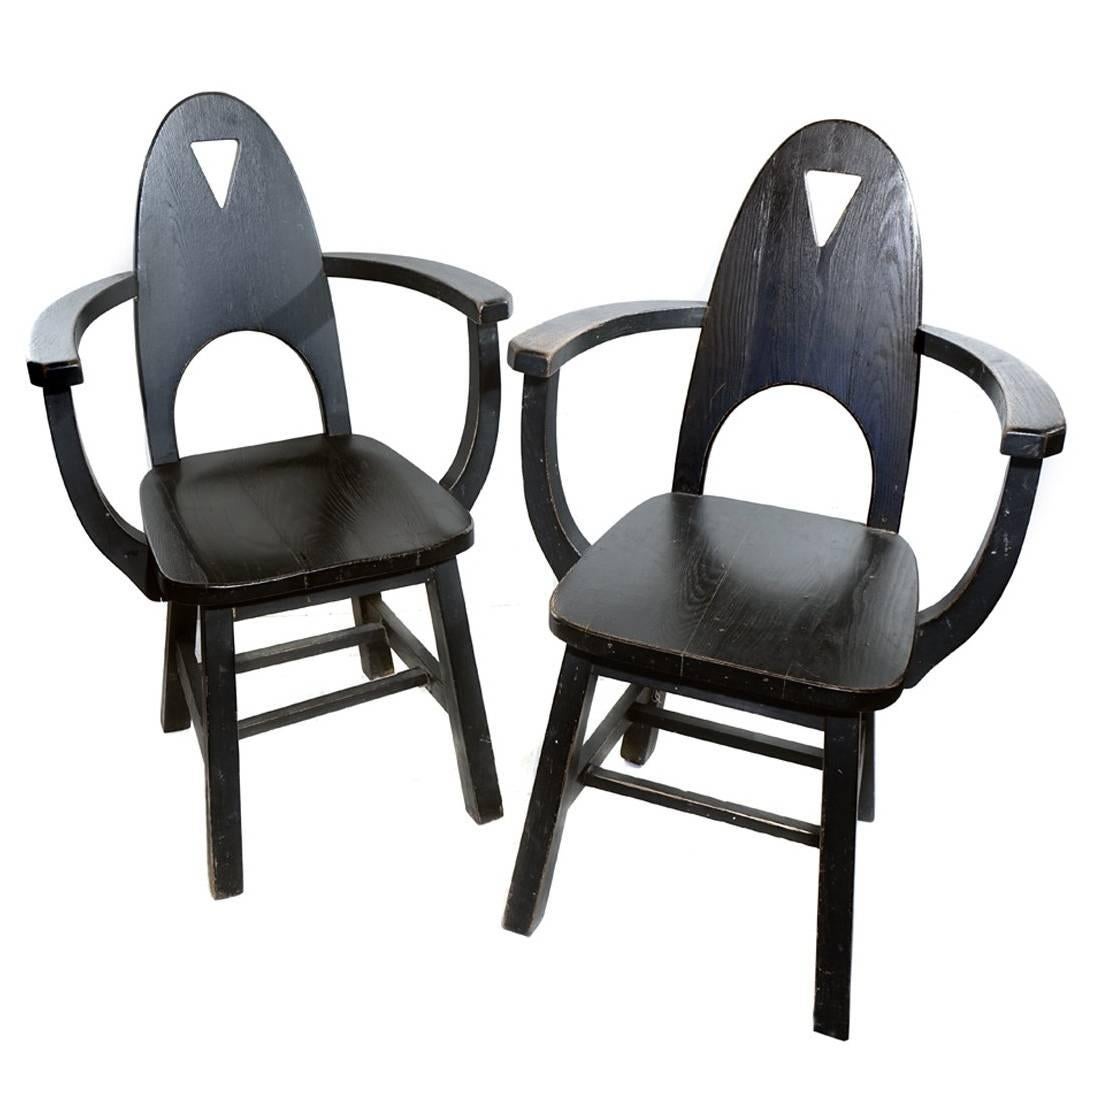 Limbert Style Arts and Crafts Armchairs